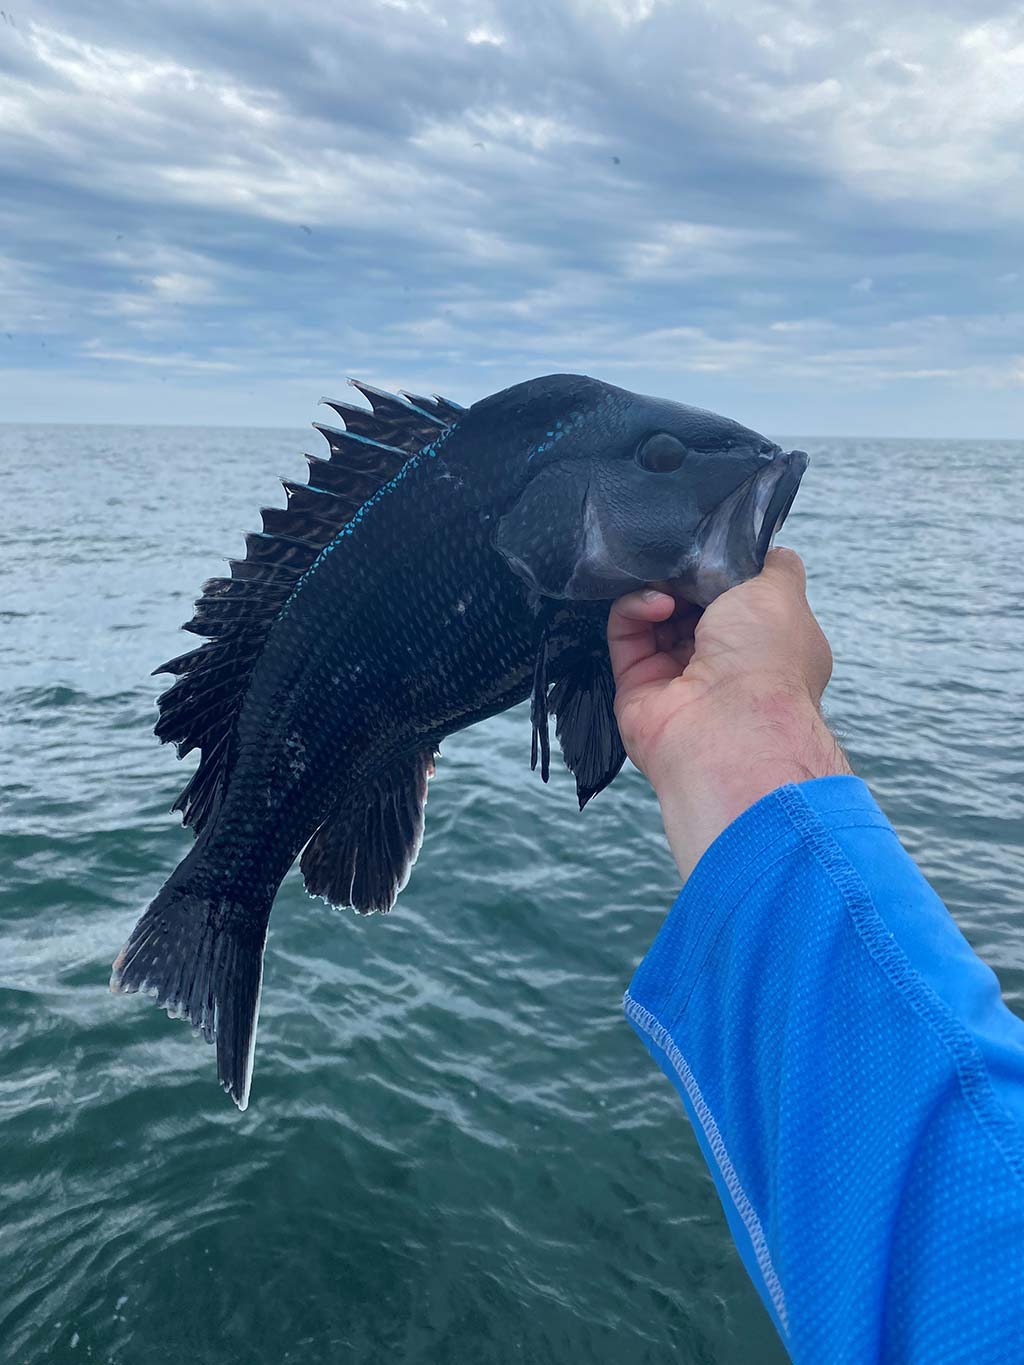 Rhode Island Fishing Report – May 20, 2021 - On The Water